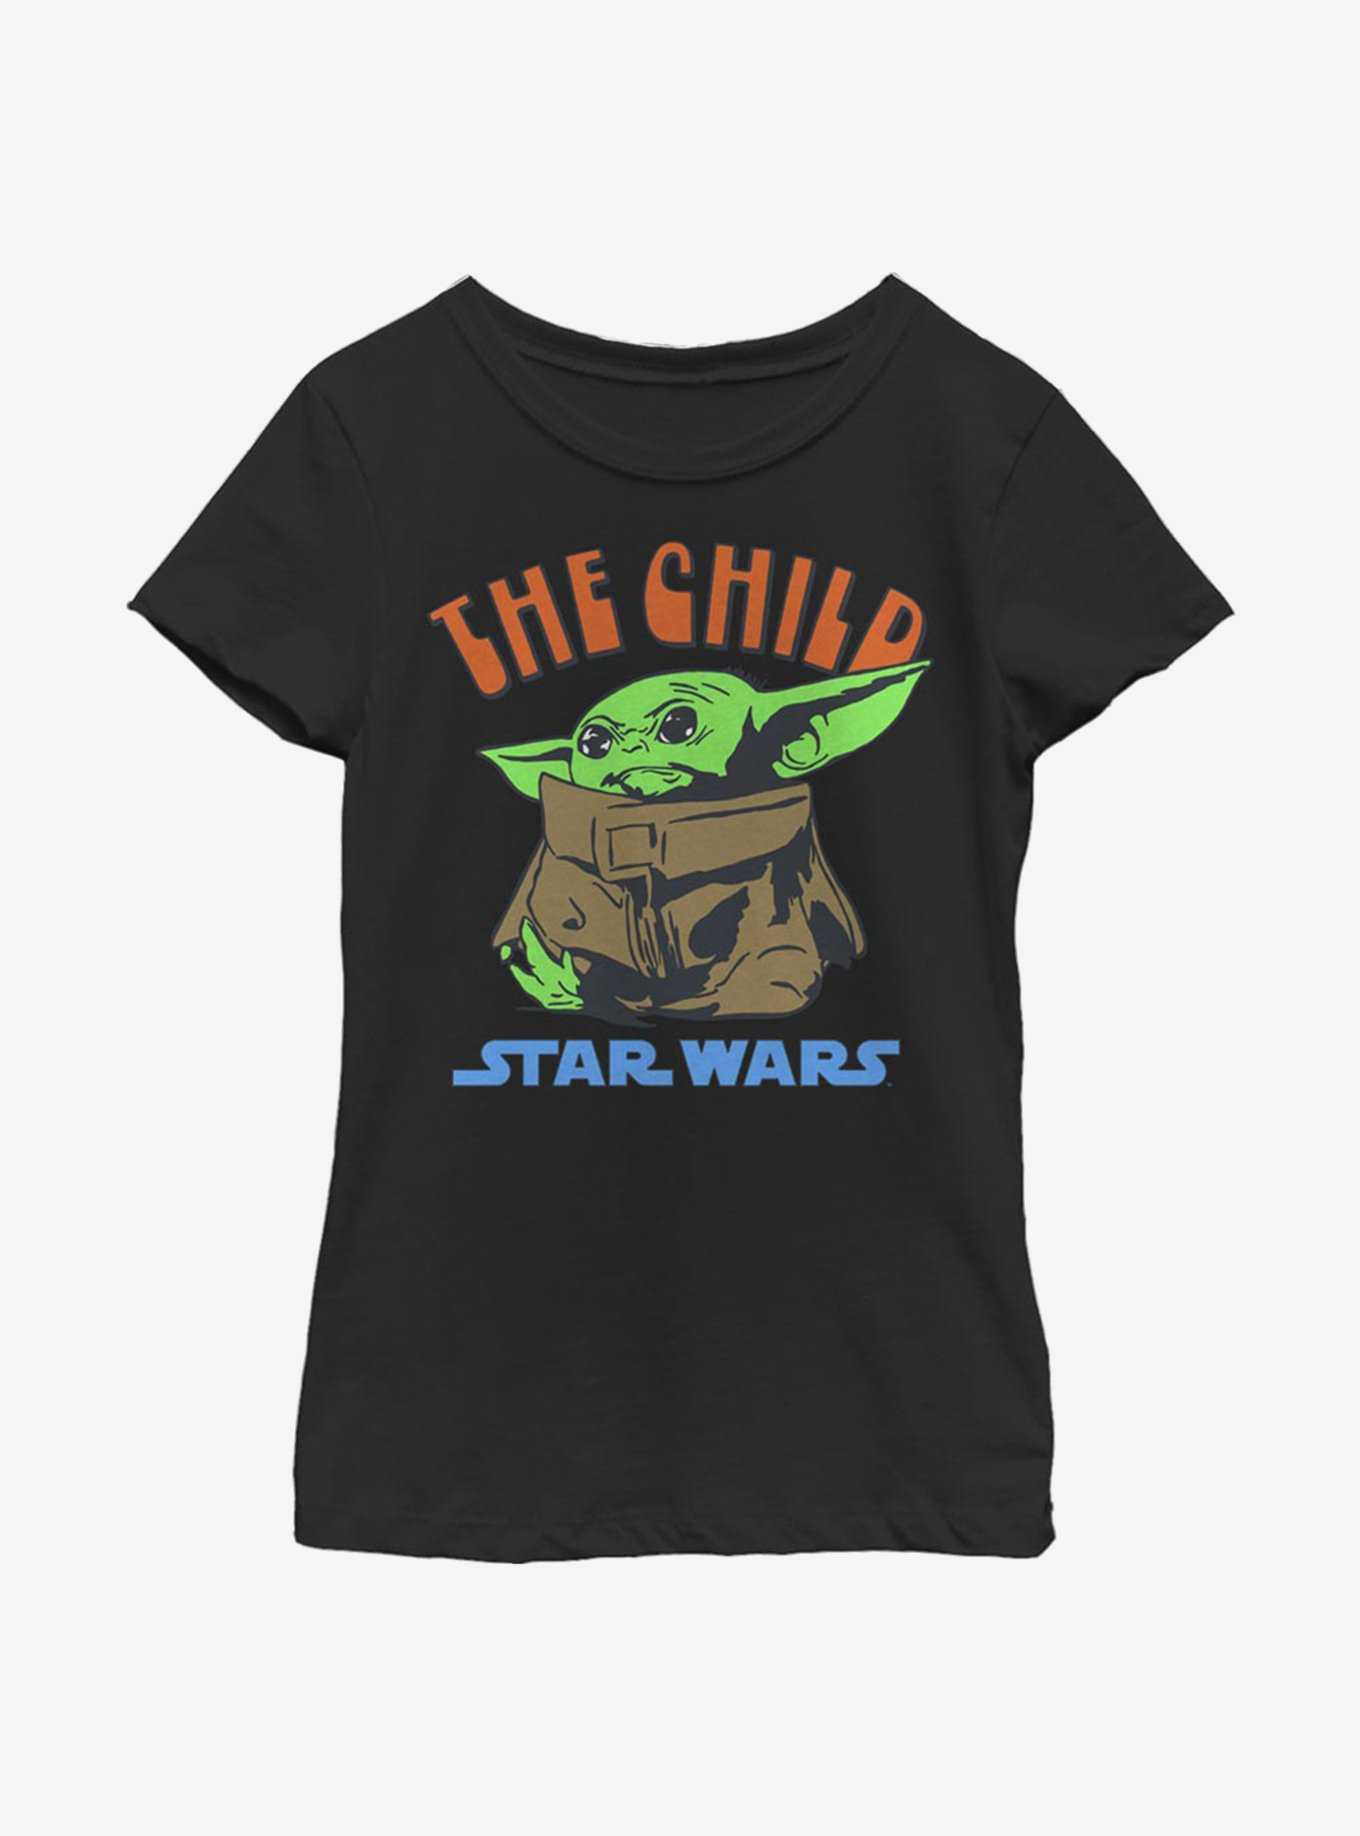 Star Wars The Mandalorian The Child Bright Letters Youth Girls T-Shirt, , hi-res